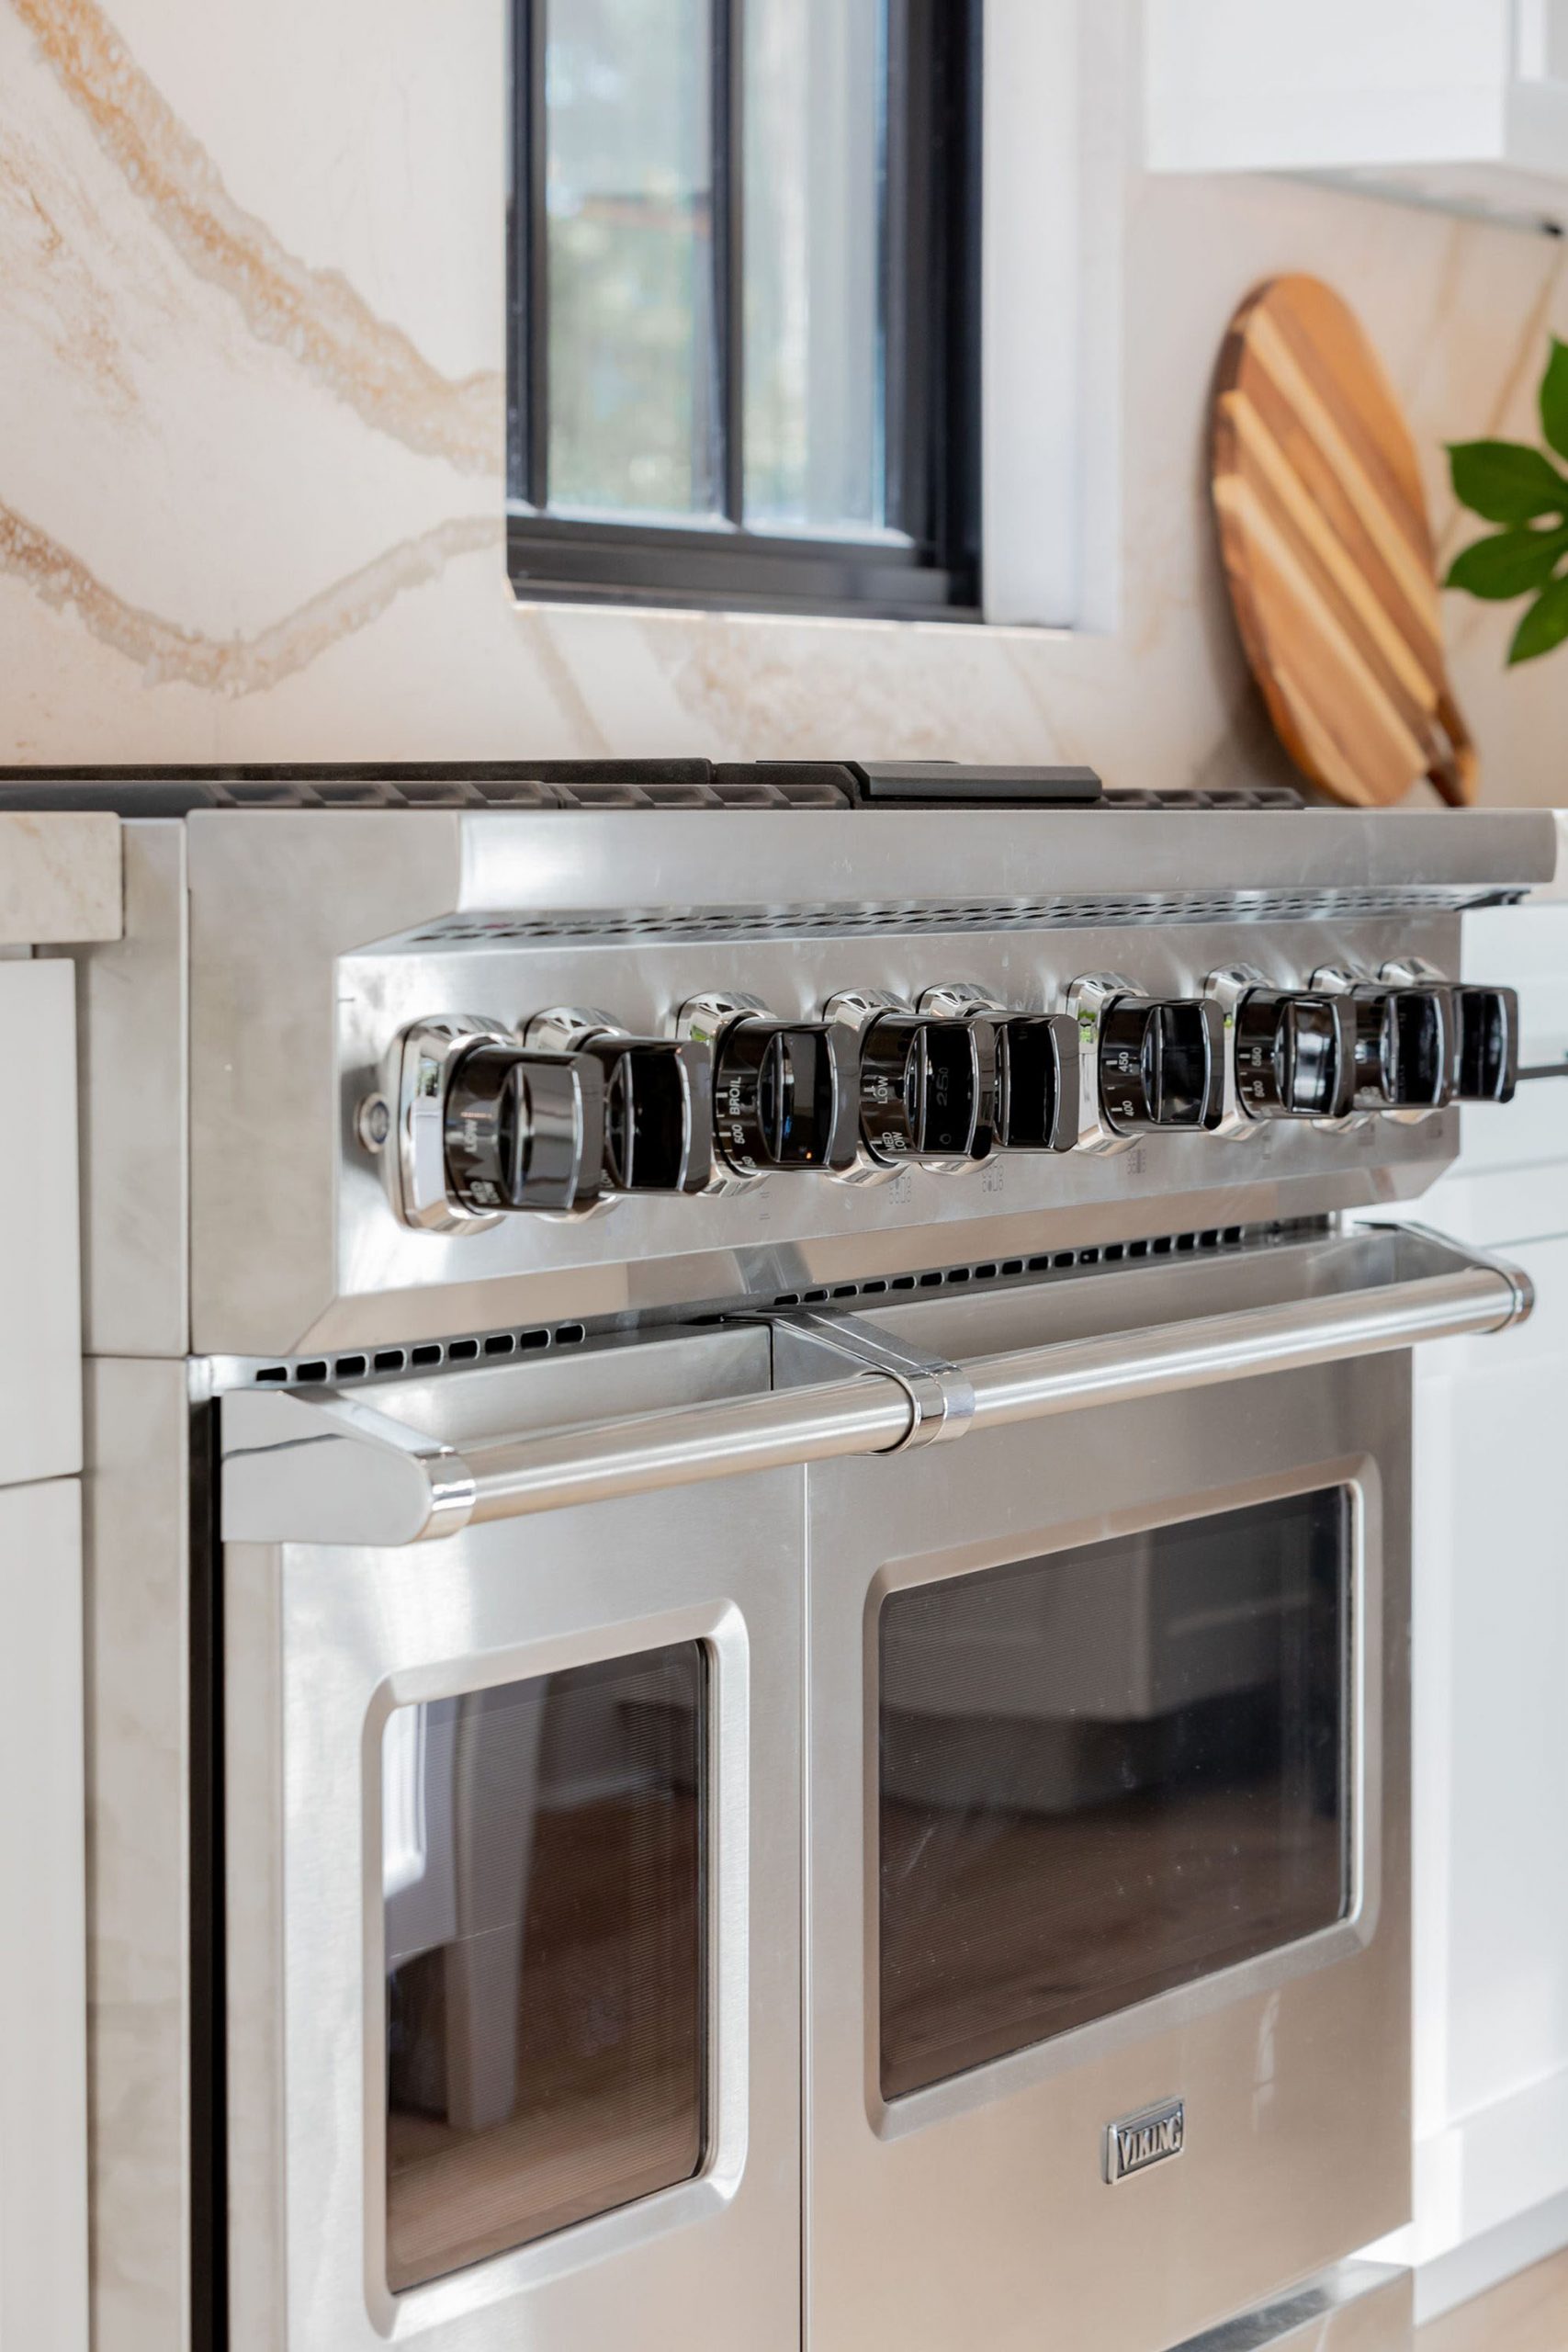 Closeup of a stainless steel Viking range with dual ovens, 6 burners and black knobs.